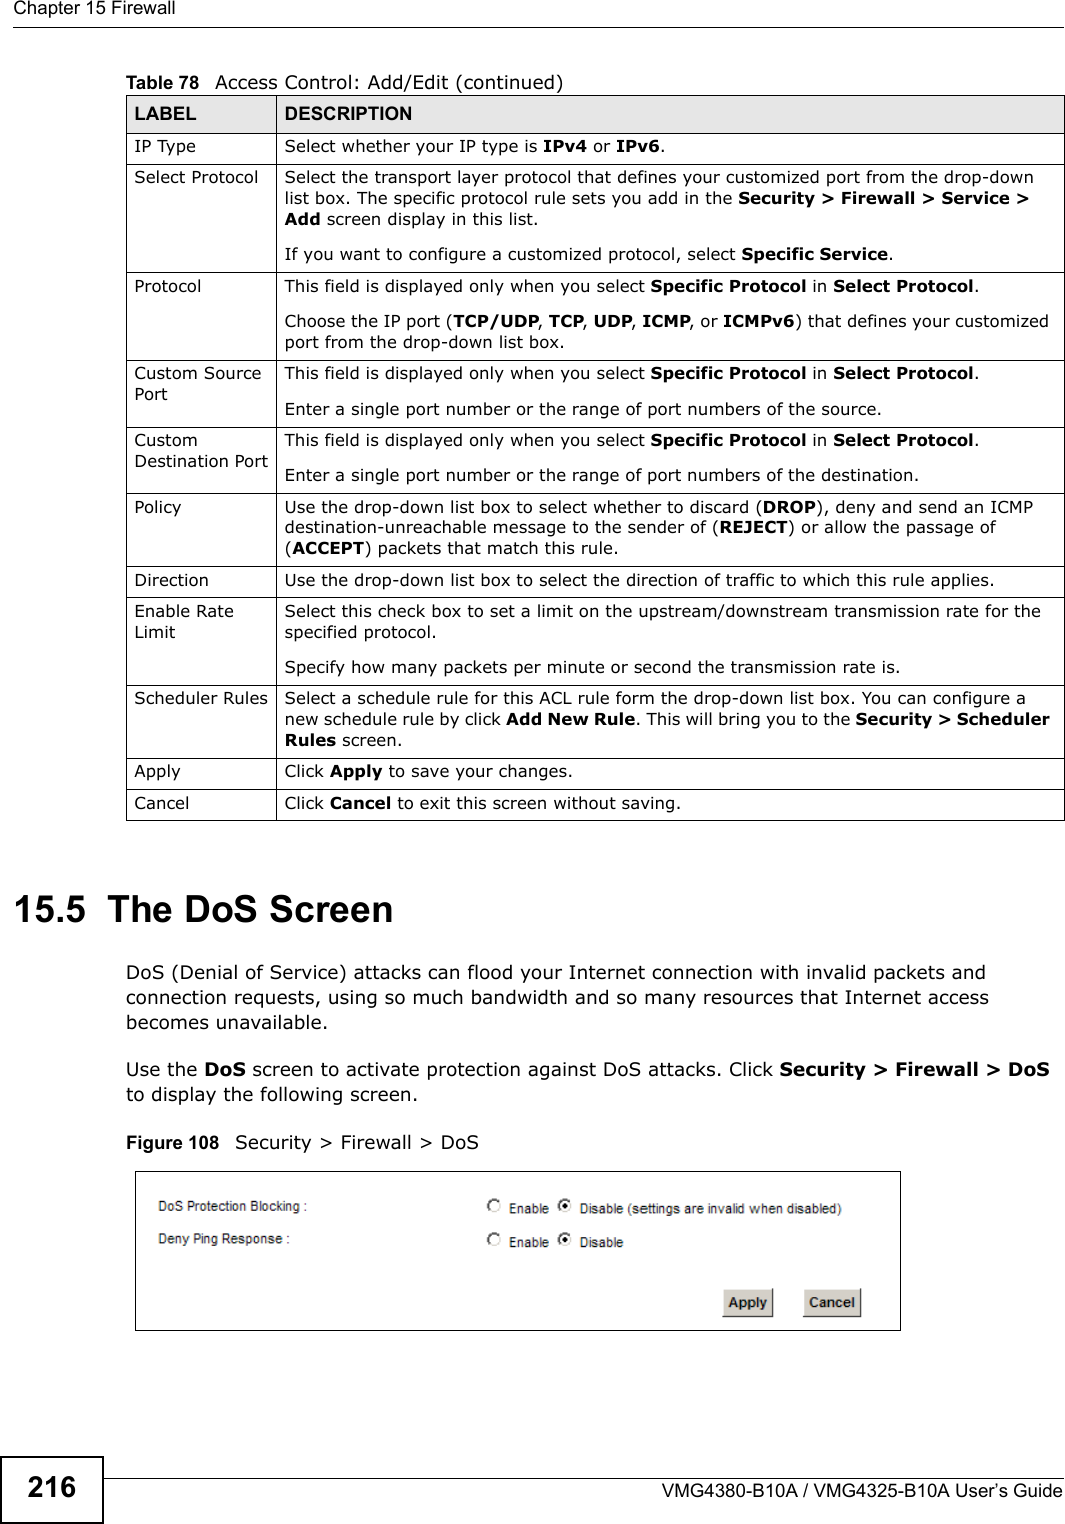 Chapter 15 FirewallVMG4380-B10A / VMG4325-B10A User’s Guide21615.5  The DoS ScreenDoS (Denial of Service) attacks can flood your Internet connection with invalid packets and connection requests, using so much bandwidth and so many resources that Internet access becomes unavailable. Use the DoS screen to activate protection against DoS attacks. Click Security &gt; Firewall &gt; DoS to display the following screen. Figure 108   Security &gt; Firewall &gt; DoSIP Type Select whether your IP type is IPv4 or IPv6. Select Protocol Select the transport layer protocol that defines your customized port from the drop-down list box. The specific protocol rule sets you add in the Security &gt; Firewall &gt; Service &gt;Add screen display in this list.If you want to configure a customized protocol, select Specific Service.Protocol This field is displayed only when you select Specific Protocol in Select Protocol.Choose the IP port (TCP/UDP, TCP, UDP, ICMP, or ICMPv6) that defines your customizedport from the drop-down list box.Custom Source PortThis field is displayed only when you select Specific Protocol in Select Protocol.Enter a single port number or the range of port numbers of the source.CustomDestination PortThis field is displayed only when you select Specific Protocol in Select Protocol.Enter a single port number or the range of port numbers of the destination.Policy Use the drop-down list box to select whether to discard (DROP), deny and send an ICMPdestination-unreachable message to the sender of (REJECT) or allow the passage of (ACCEPT) packets that match this rule.Direction  Use the drop-down list box to select the direction of traffic to which this rule applies.Enable RateLimitSelect this check box to set a limit on the upstream/downstream transmission rate for the specified protocol.Specify how many packets per minute or second the transmission rate is.Scheduler Rules Select a schedule rule for this ACL rule form the drop-down list box. You can configure a new schedule rule by click Add New Rule. This will bring you to the Security &gt; Scheduler Rules screen.Apply Click Apply to save your changes.Cancel Click Cancel to exit this screen without saving.Table 78   Access Control: Add/Edit (continued)LABEL DESCRIPTION